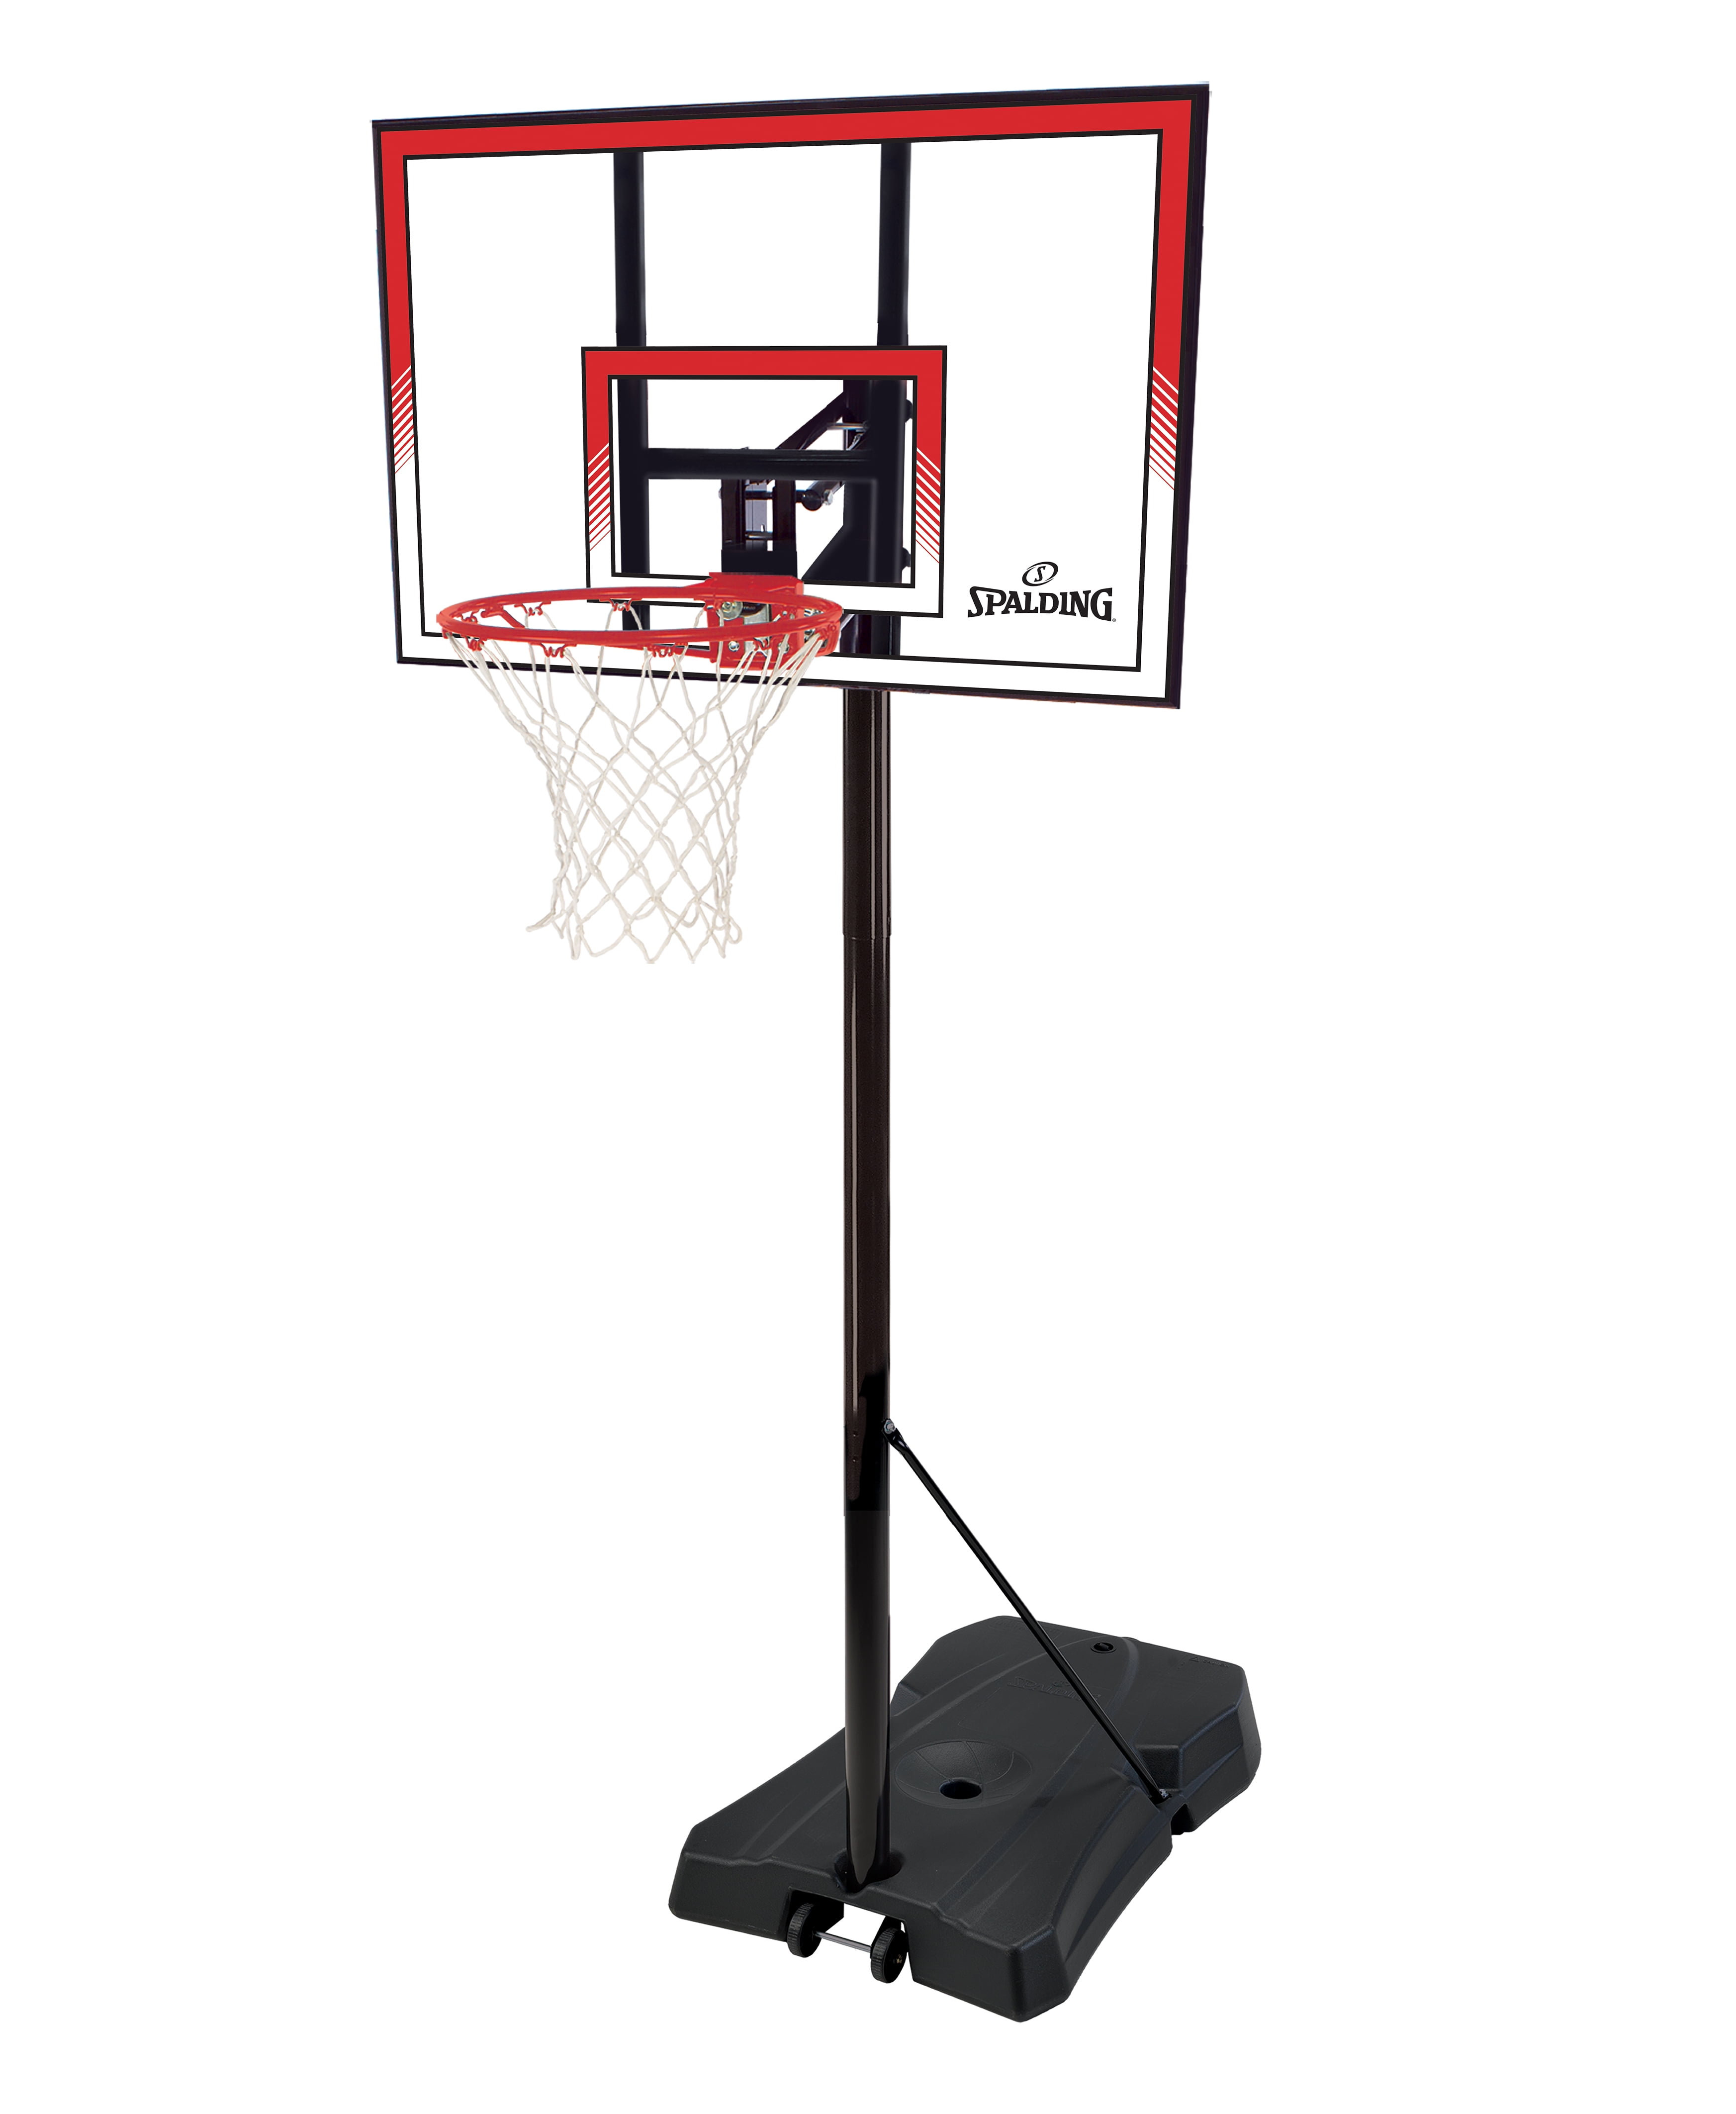 Spalding Ratchet Lift 44 In. Polycarbonate Portable Basketball Hoop